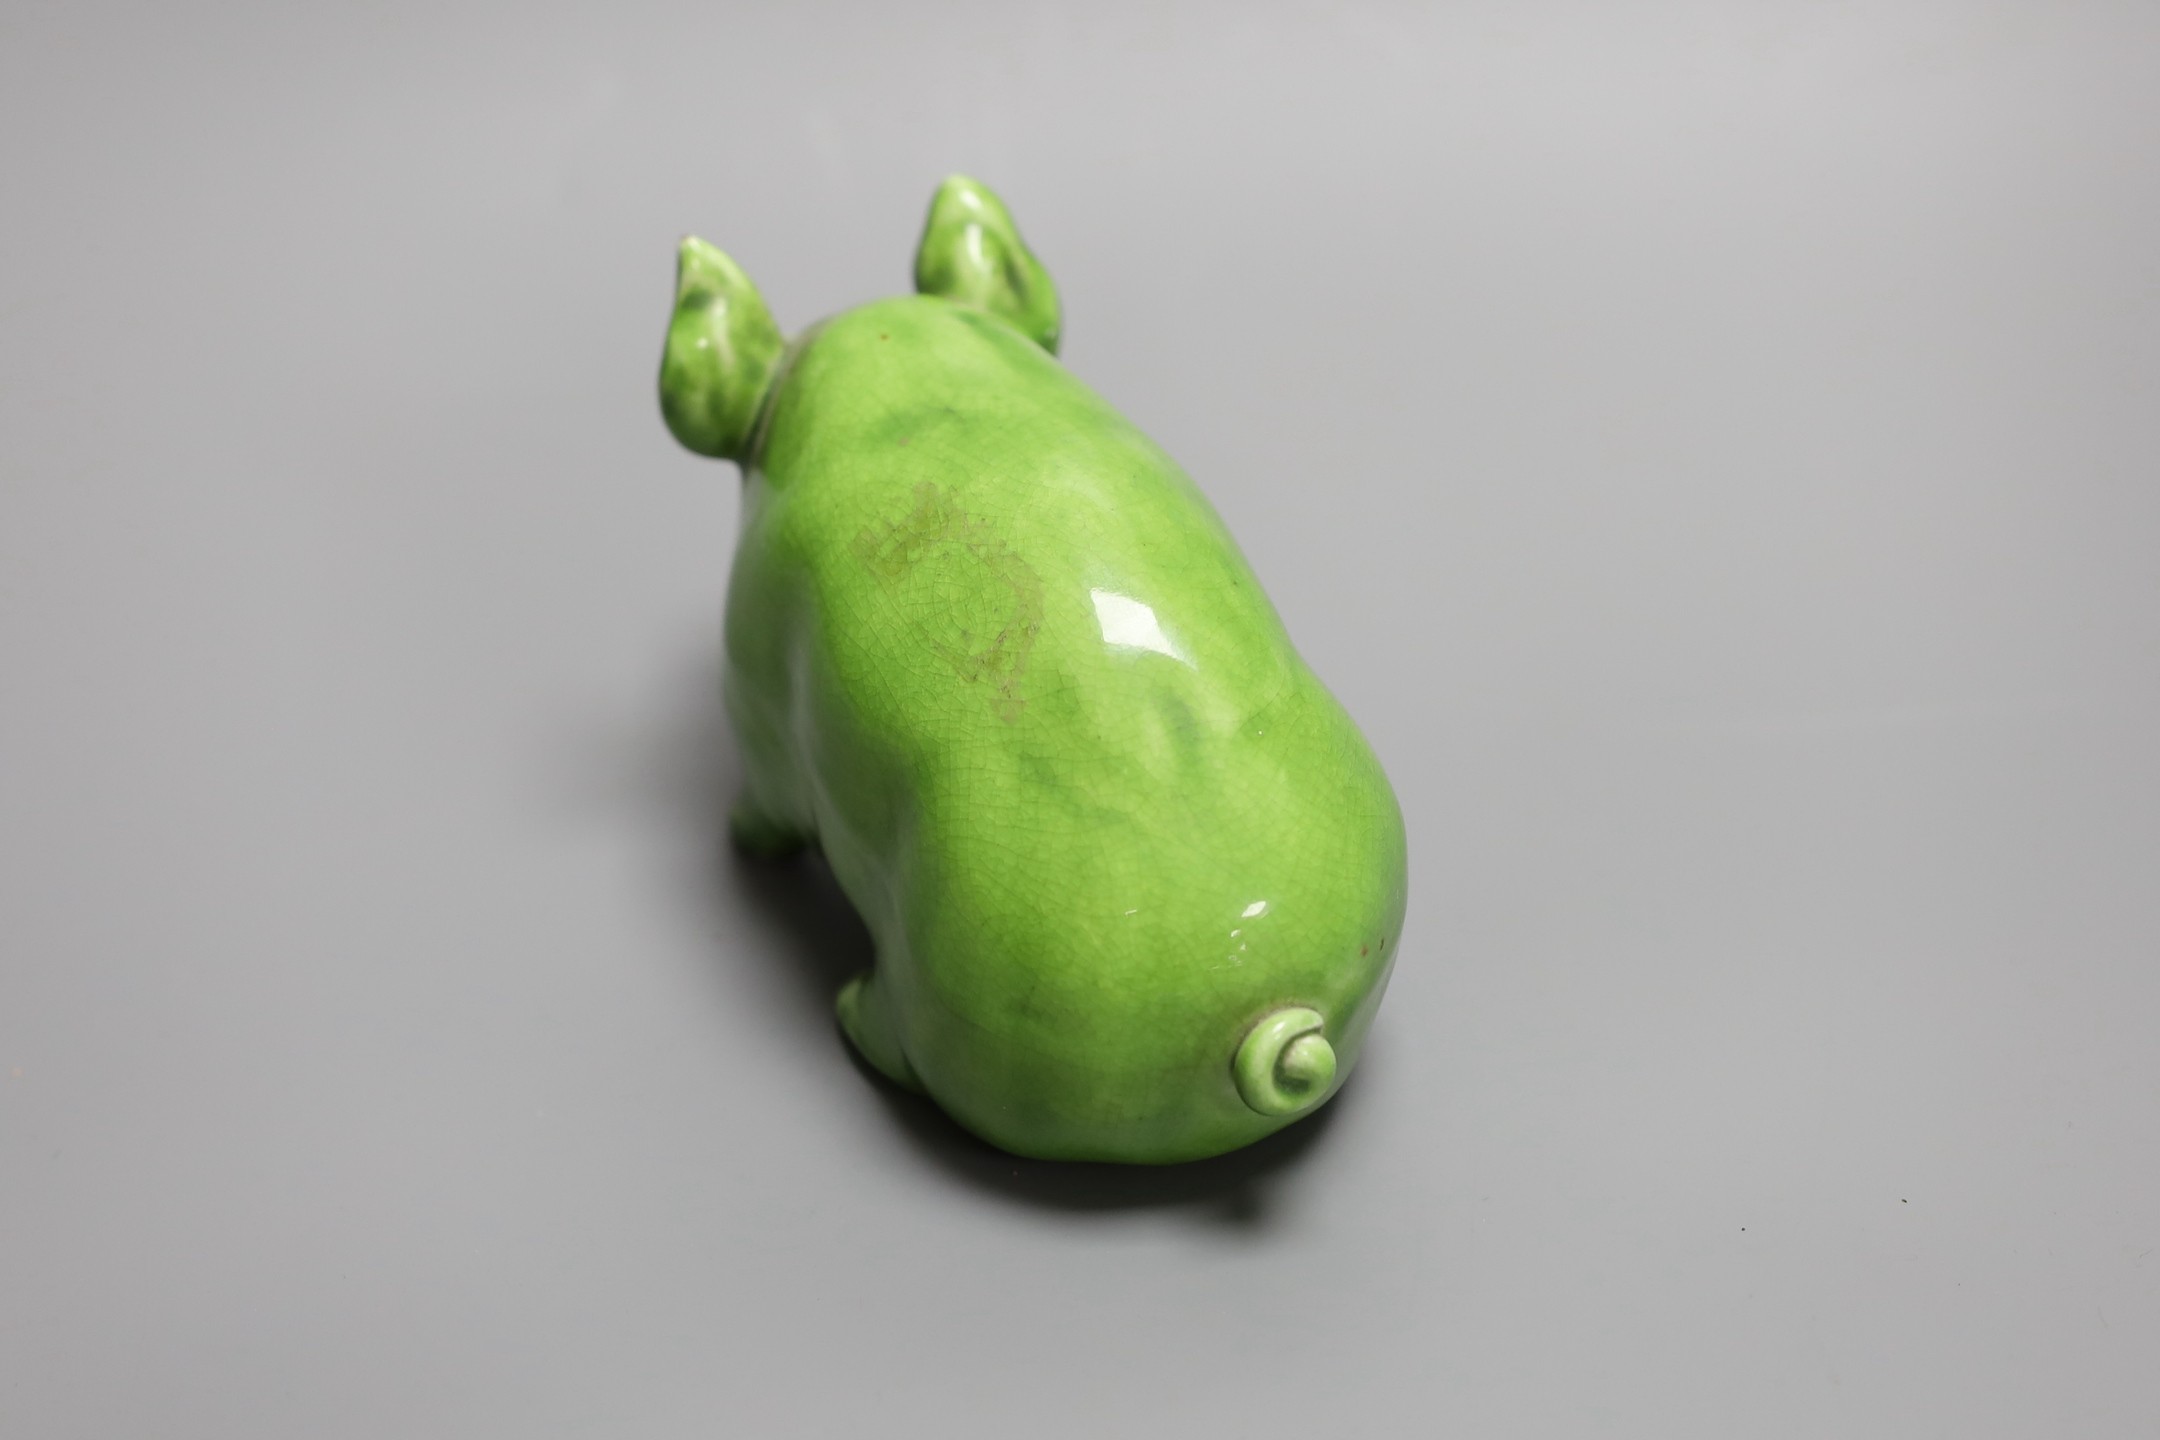 A Wemyss ware pig, decorated in lime green glaze and impressed to the base Wemyss ware RH & S, for Robert Heron & Son of Fife, 16.5cm long, 10cm high.